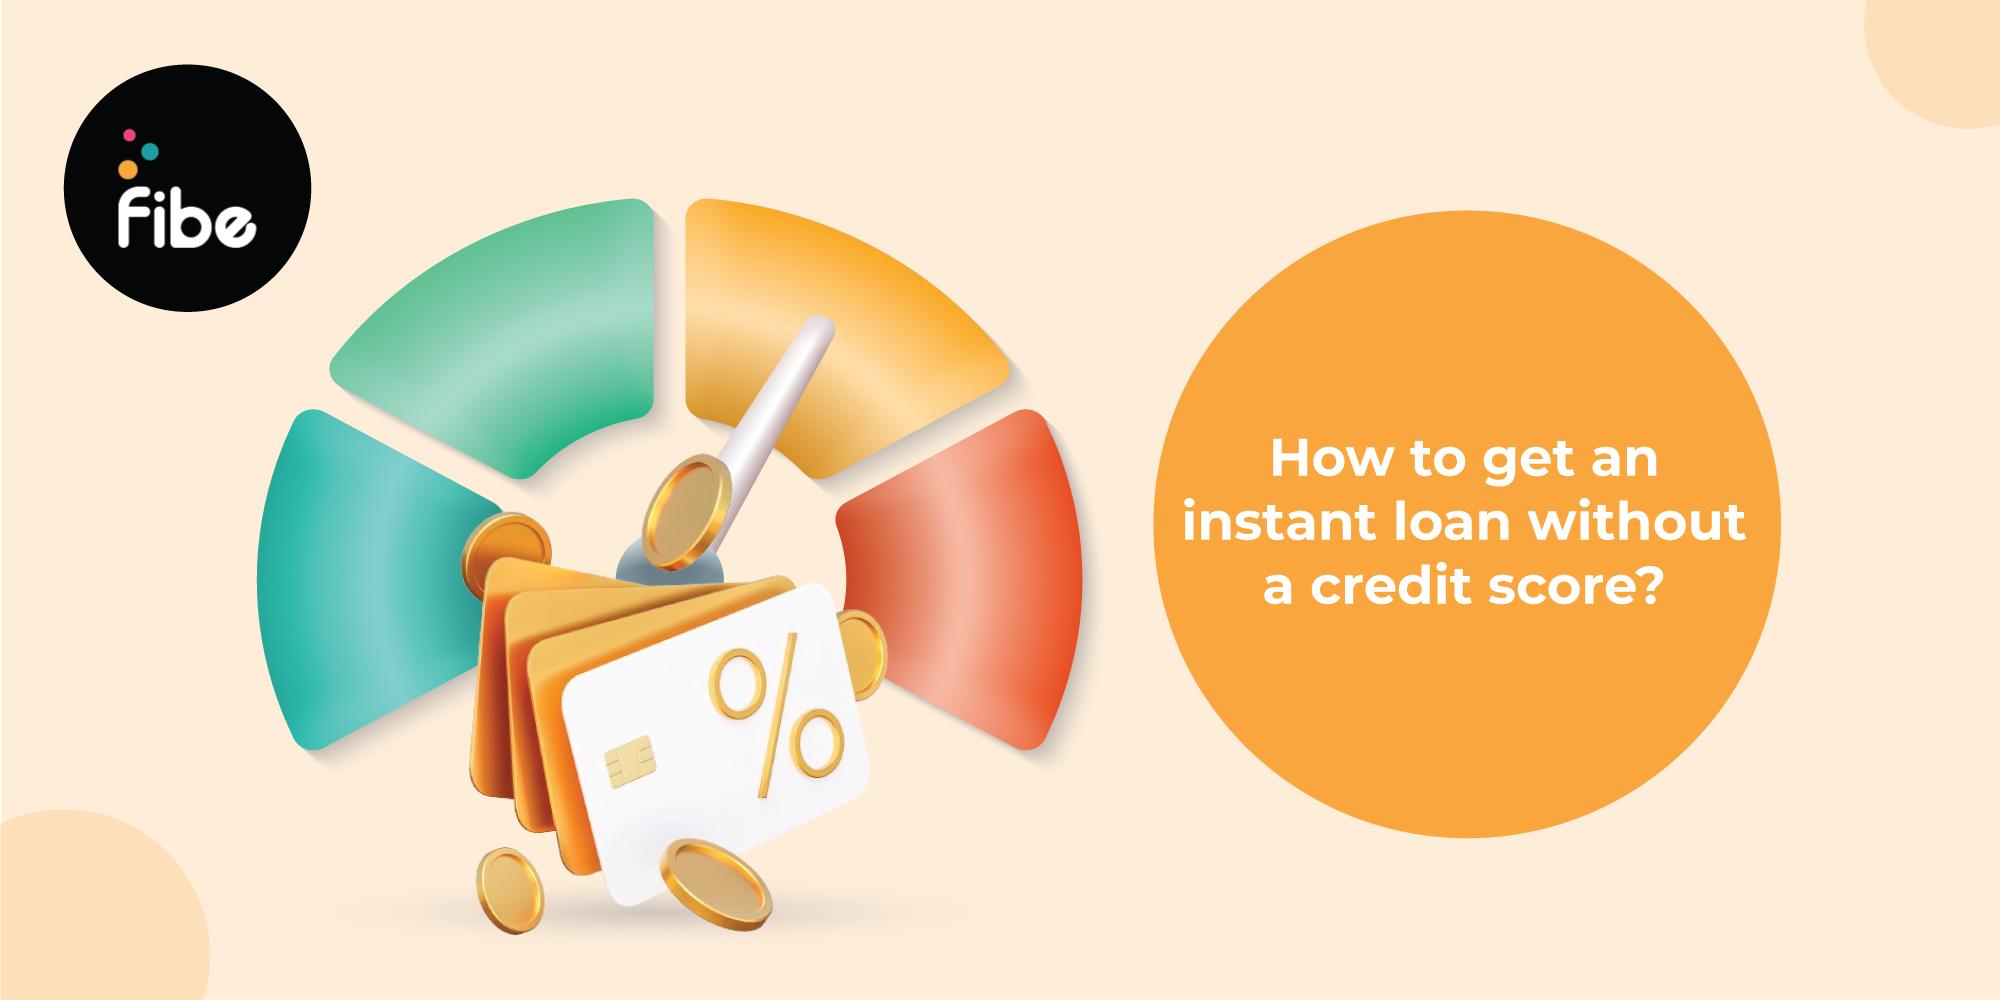 How to Get an Instant Loan without Credit Score?